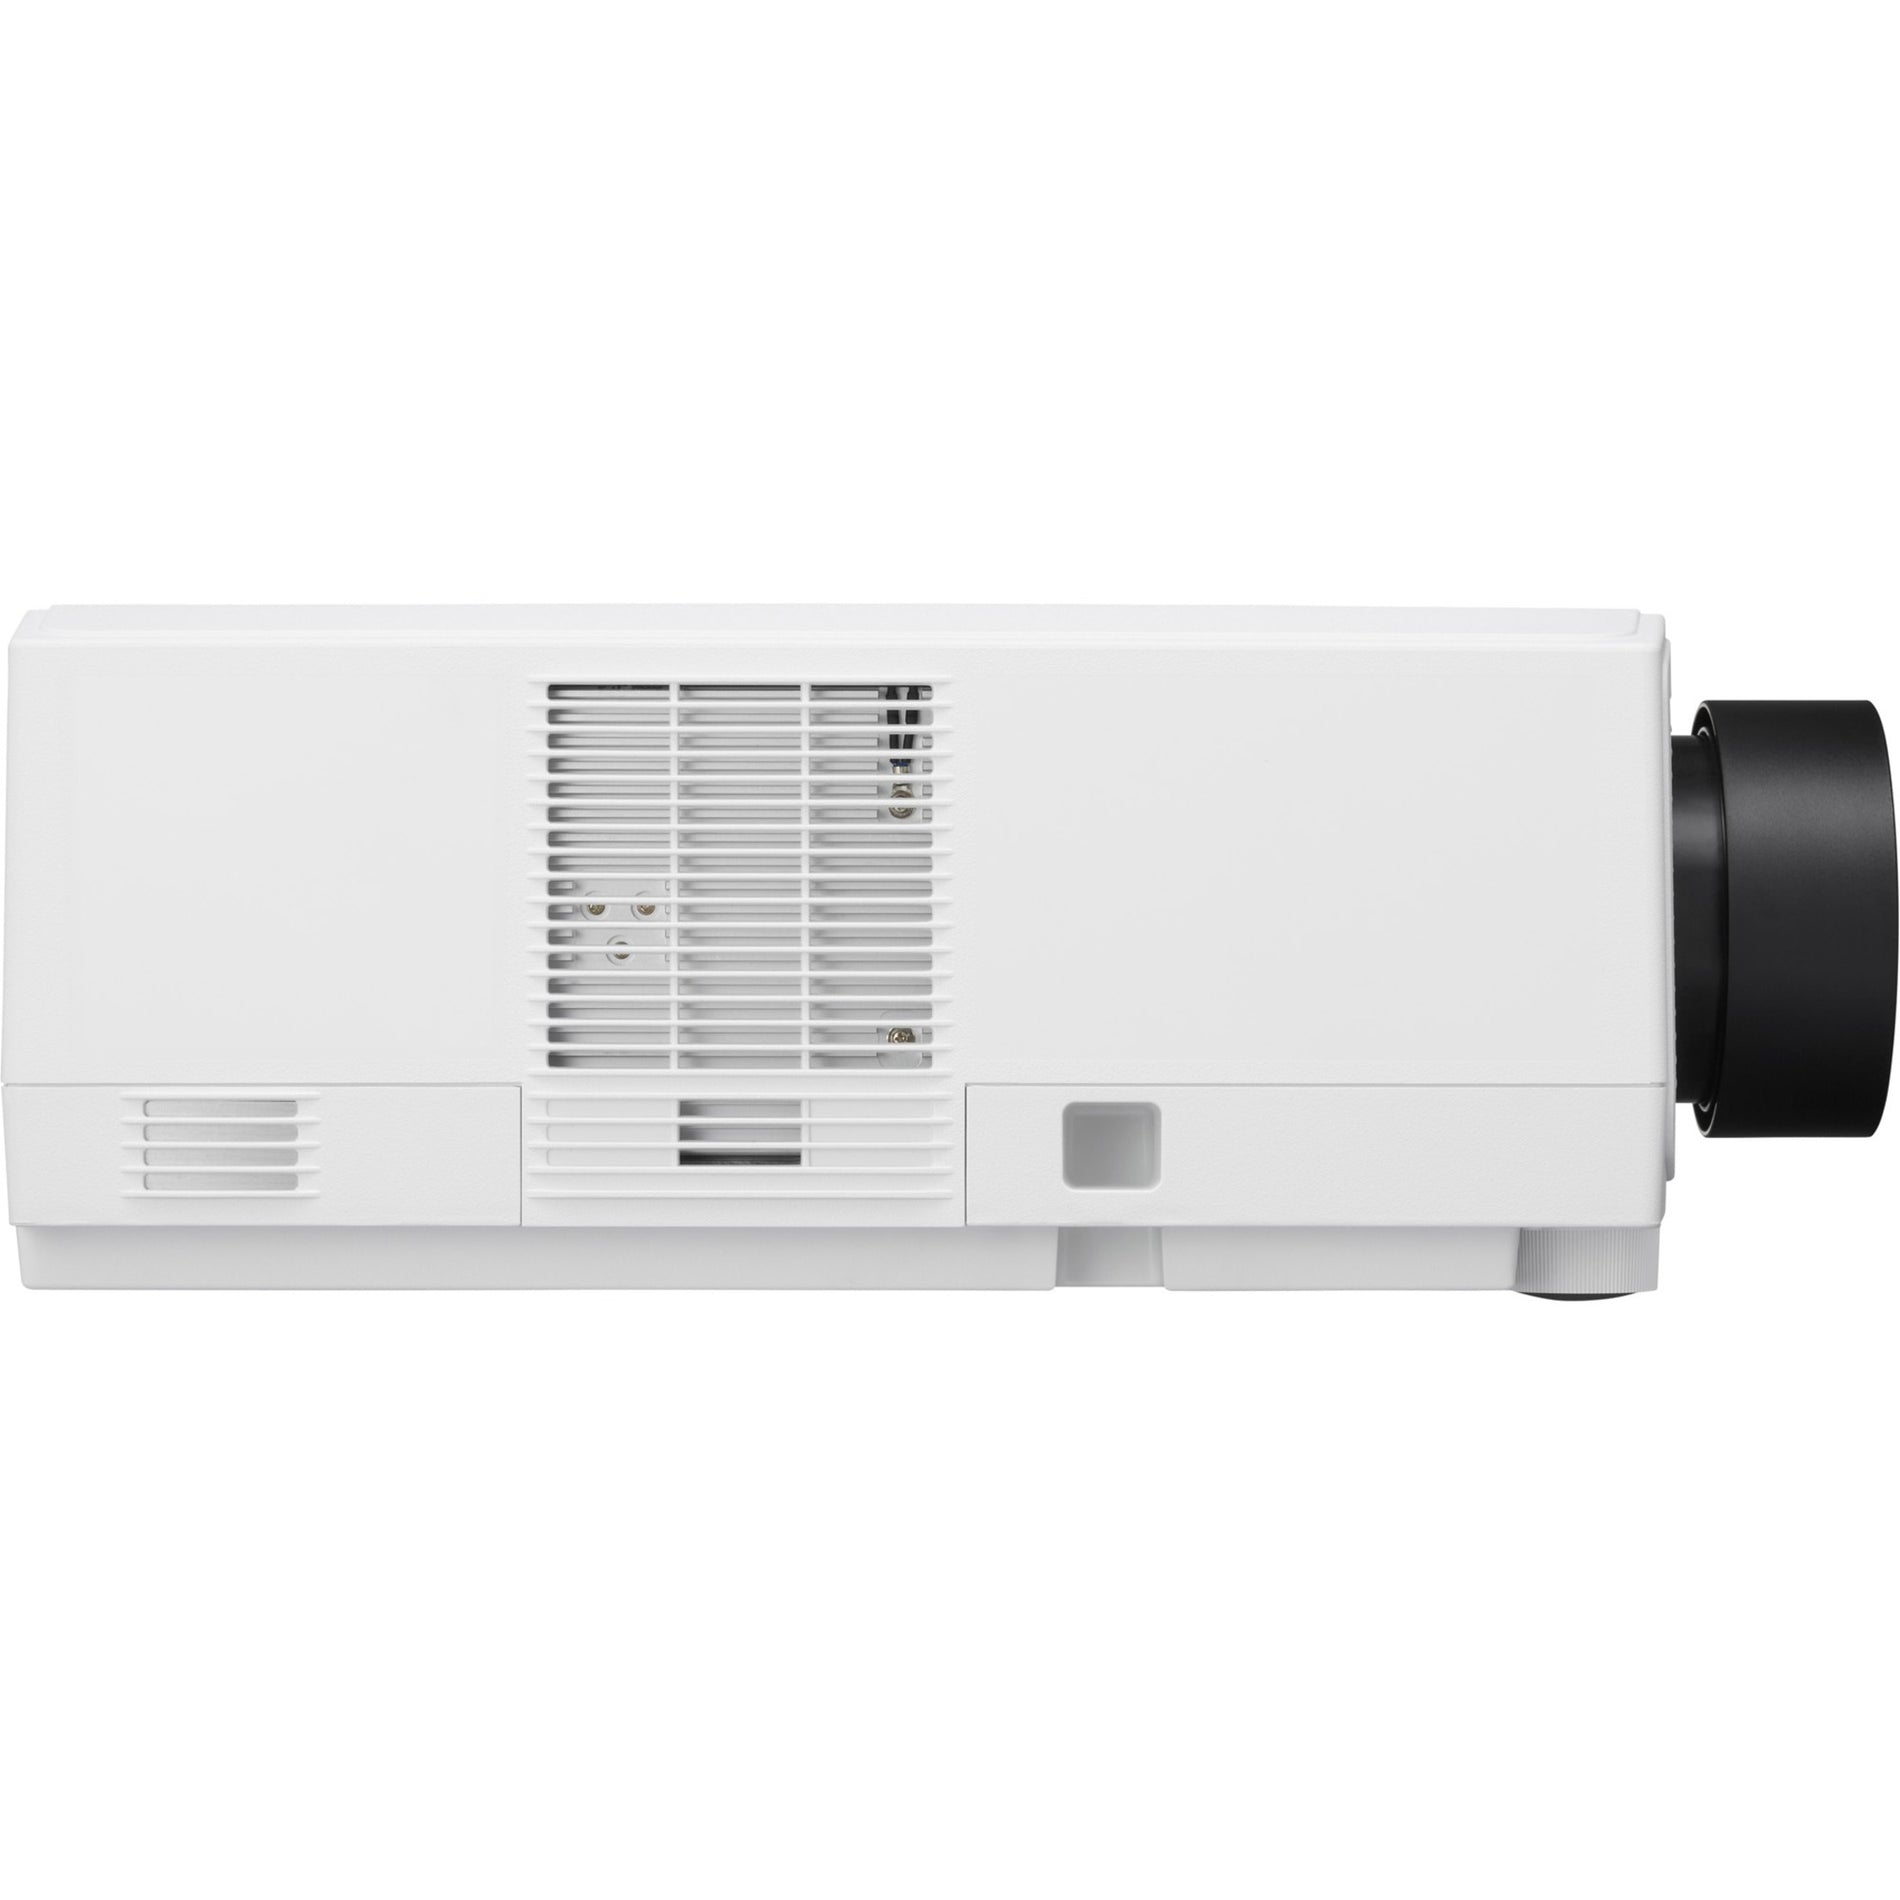 NEC Display NP-PV710UL-W1-13ZL 7100-Lumen Professional Installation Projector With Lens And 4K Support, 60P Content, White Cabinet